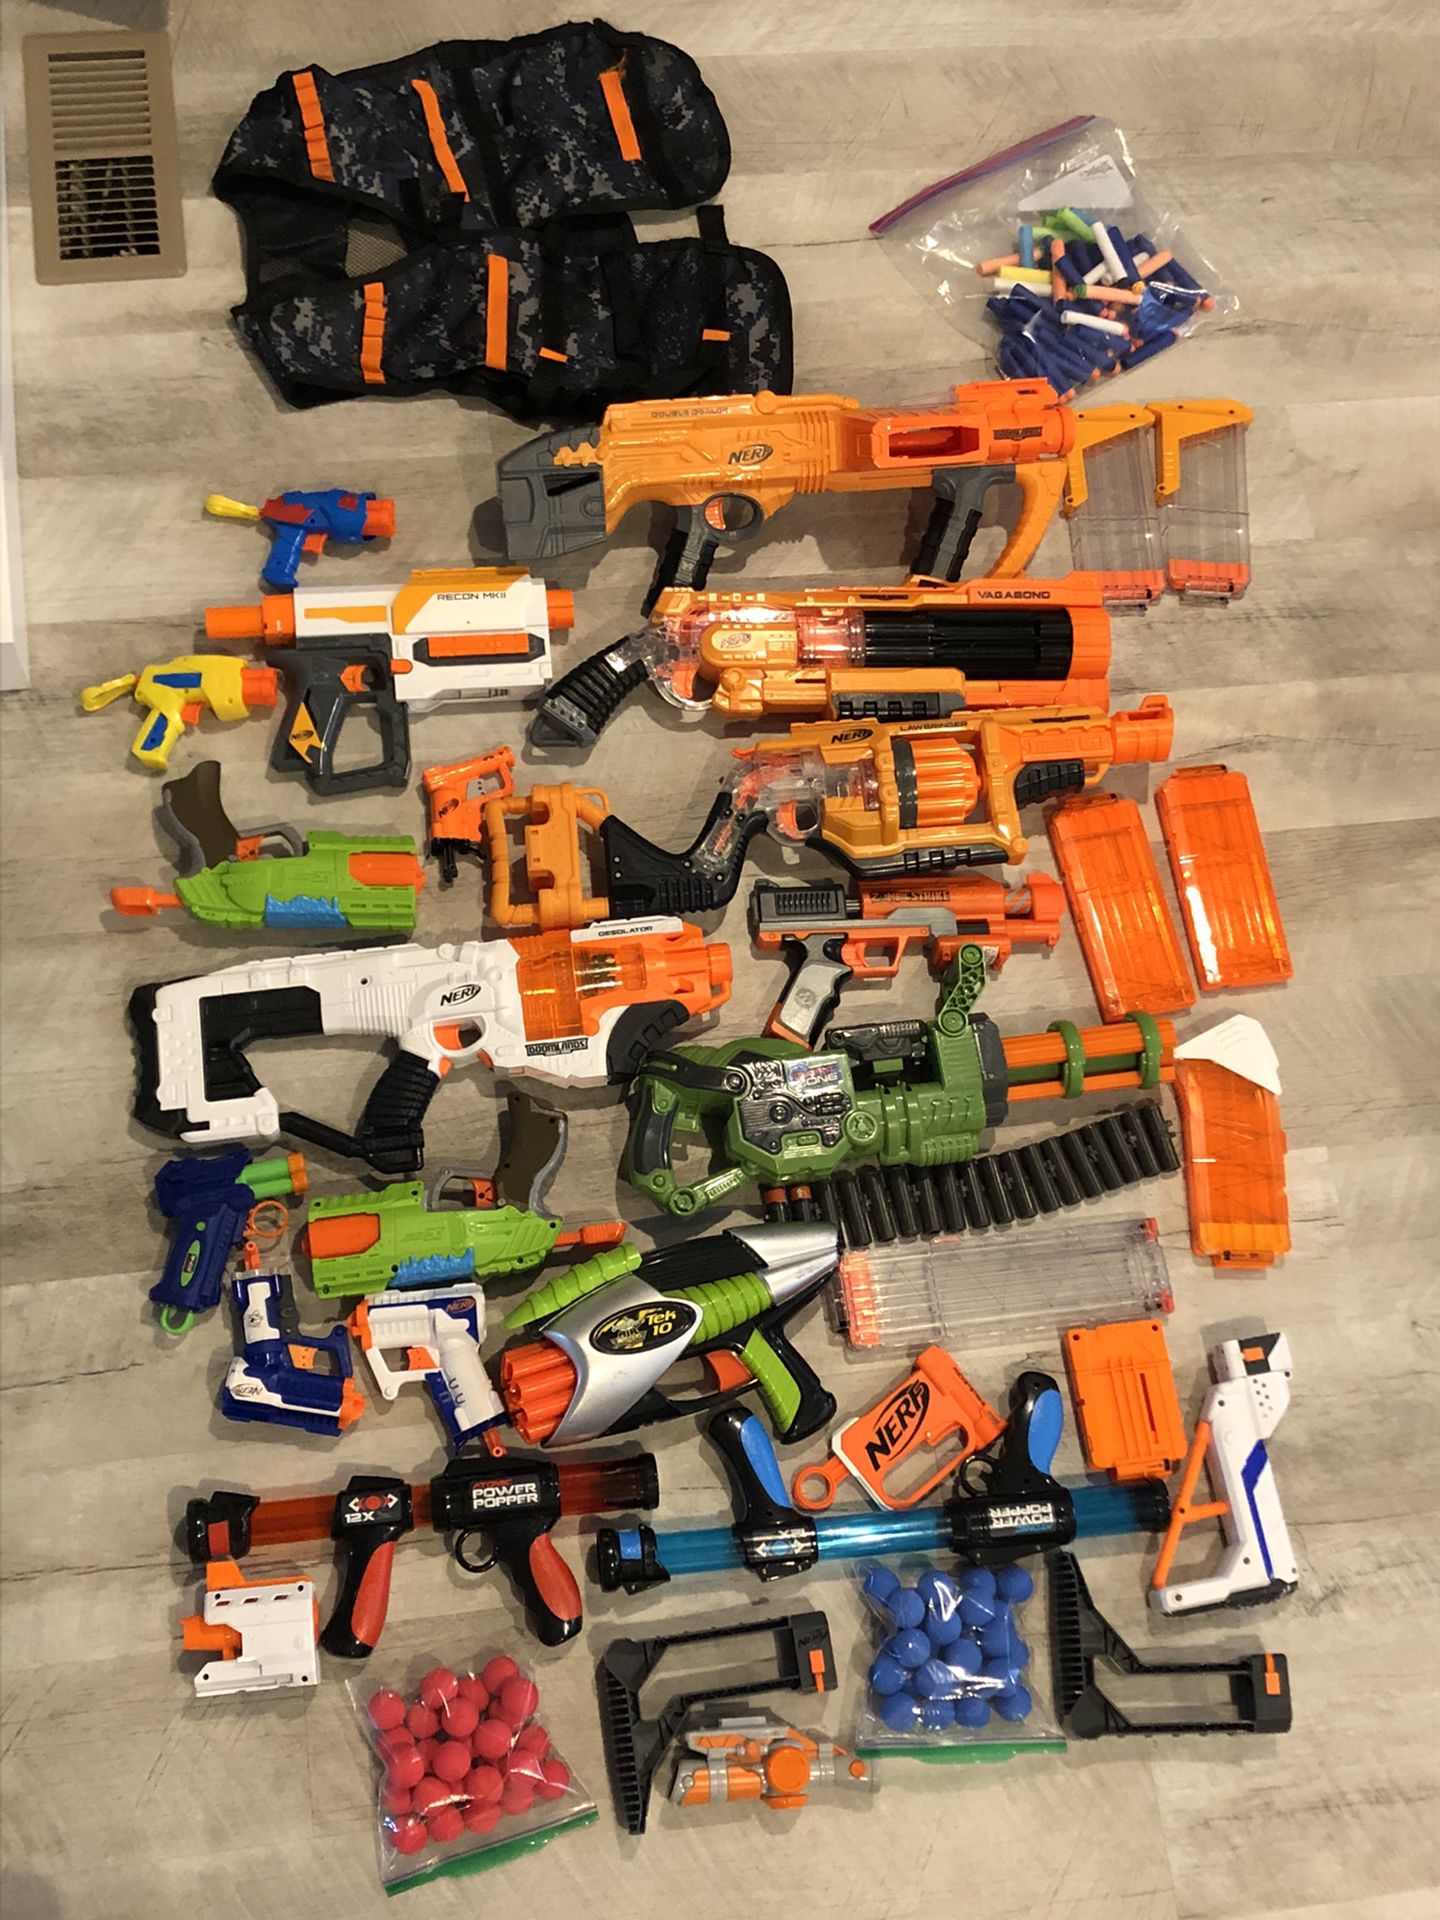 Nerf guns and accessories (all pictured)